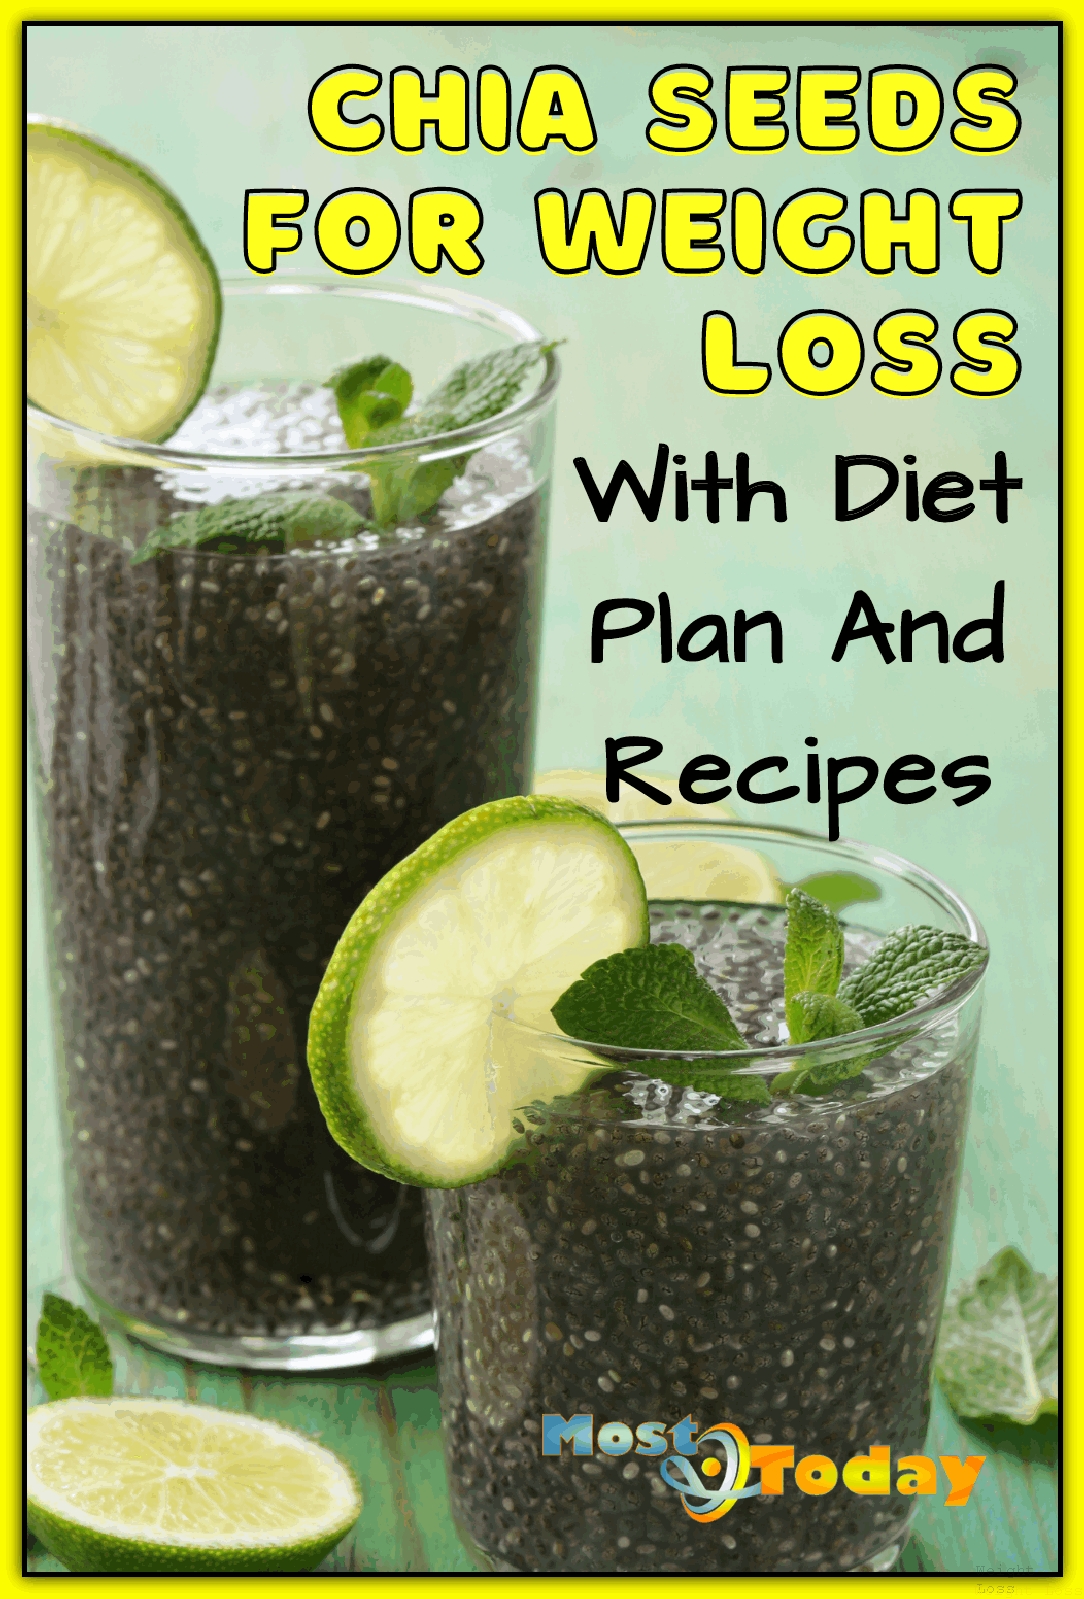 Chia Seed For Weight Loss With Diet Plan And Recipes - Weight Loss Plan